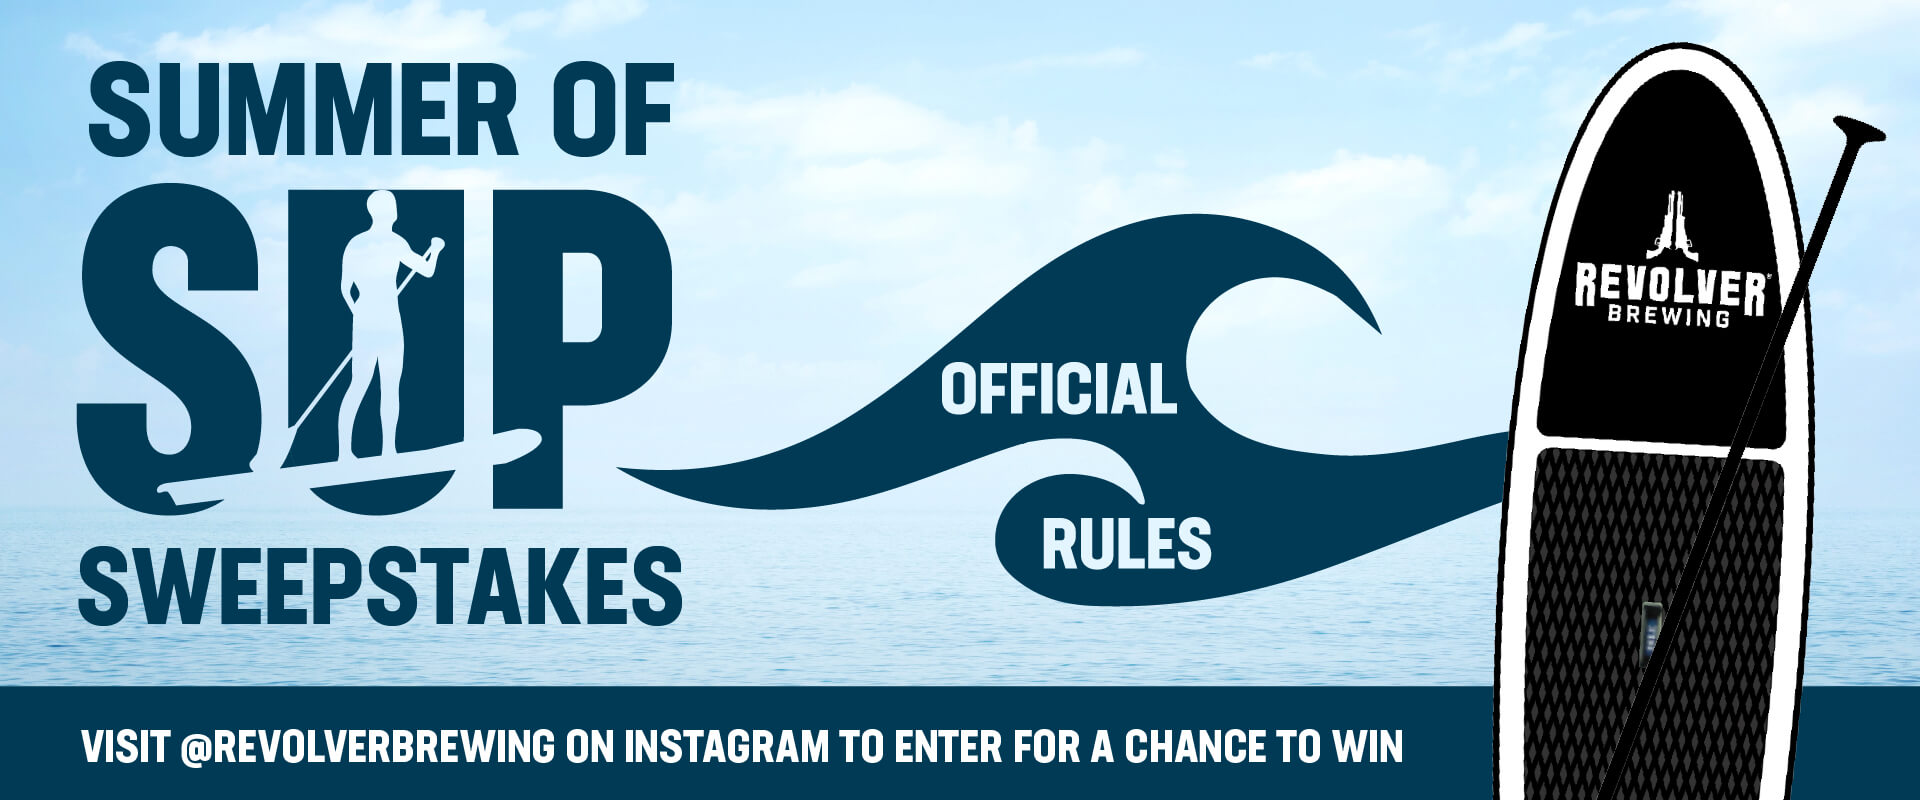 Summer of sup sweepstakes